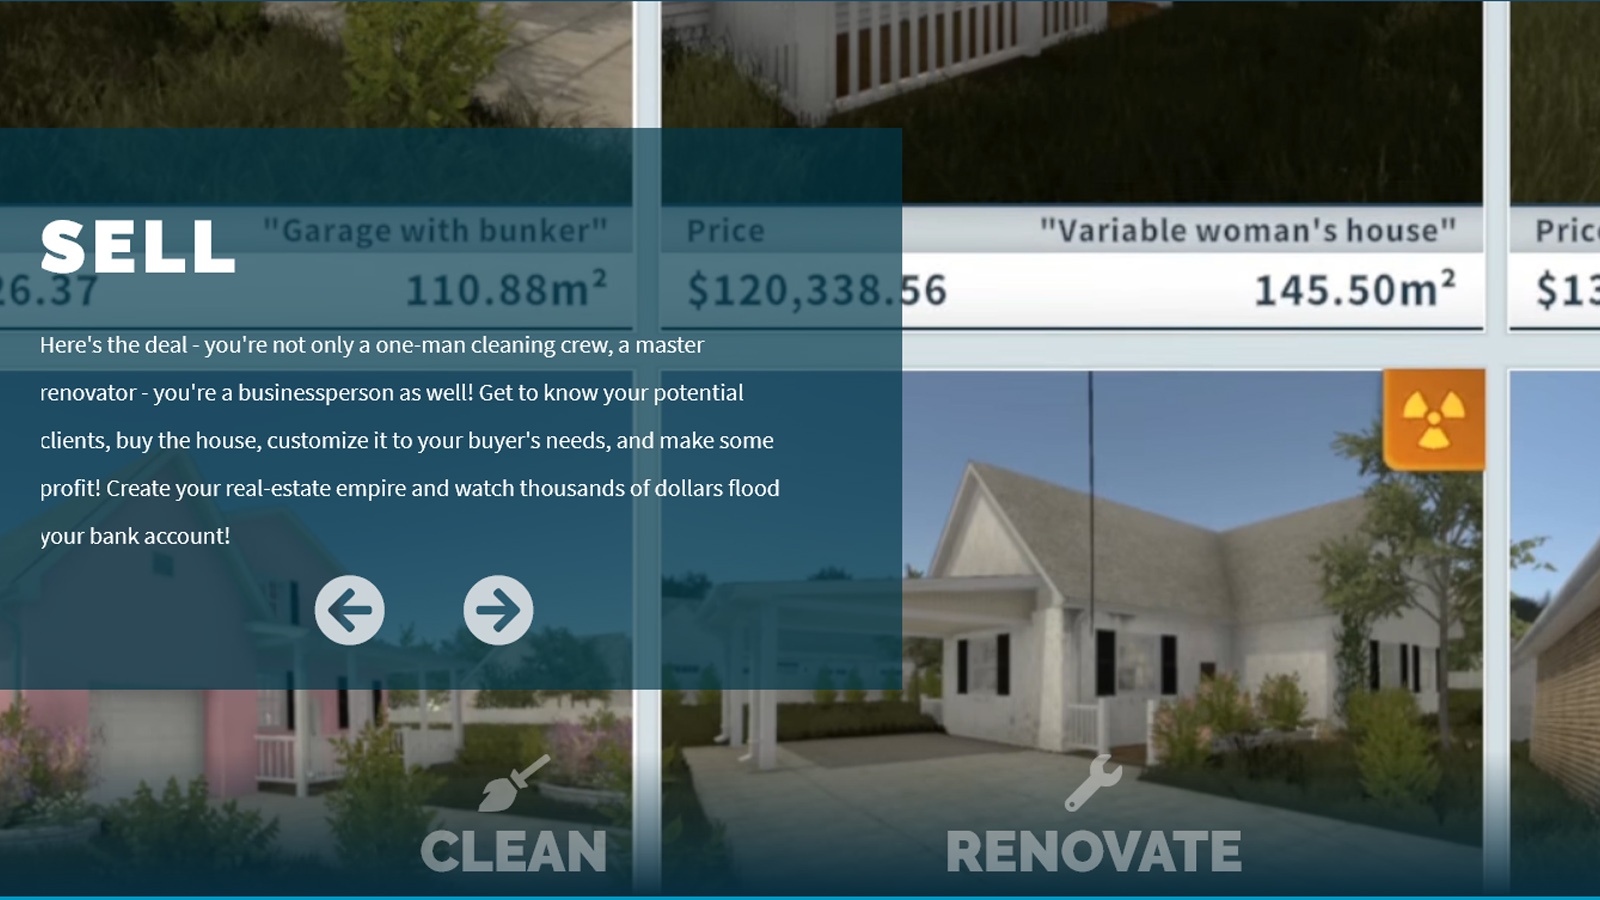 Find pricing, reviews and other details about House Flipper